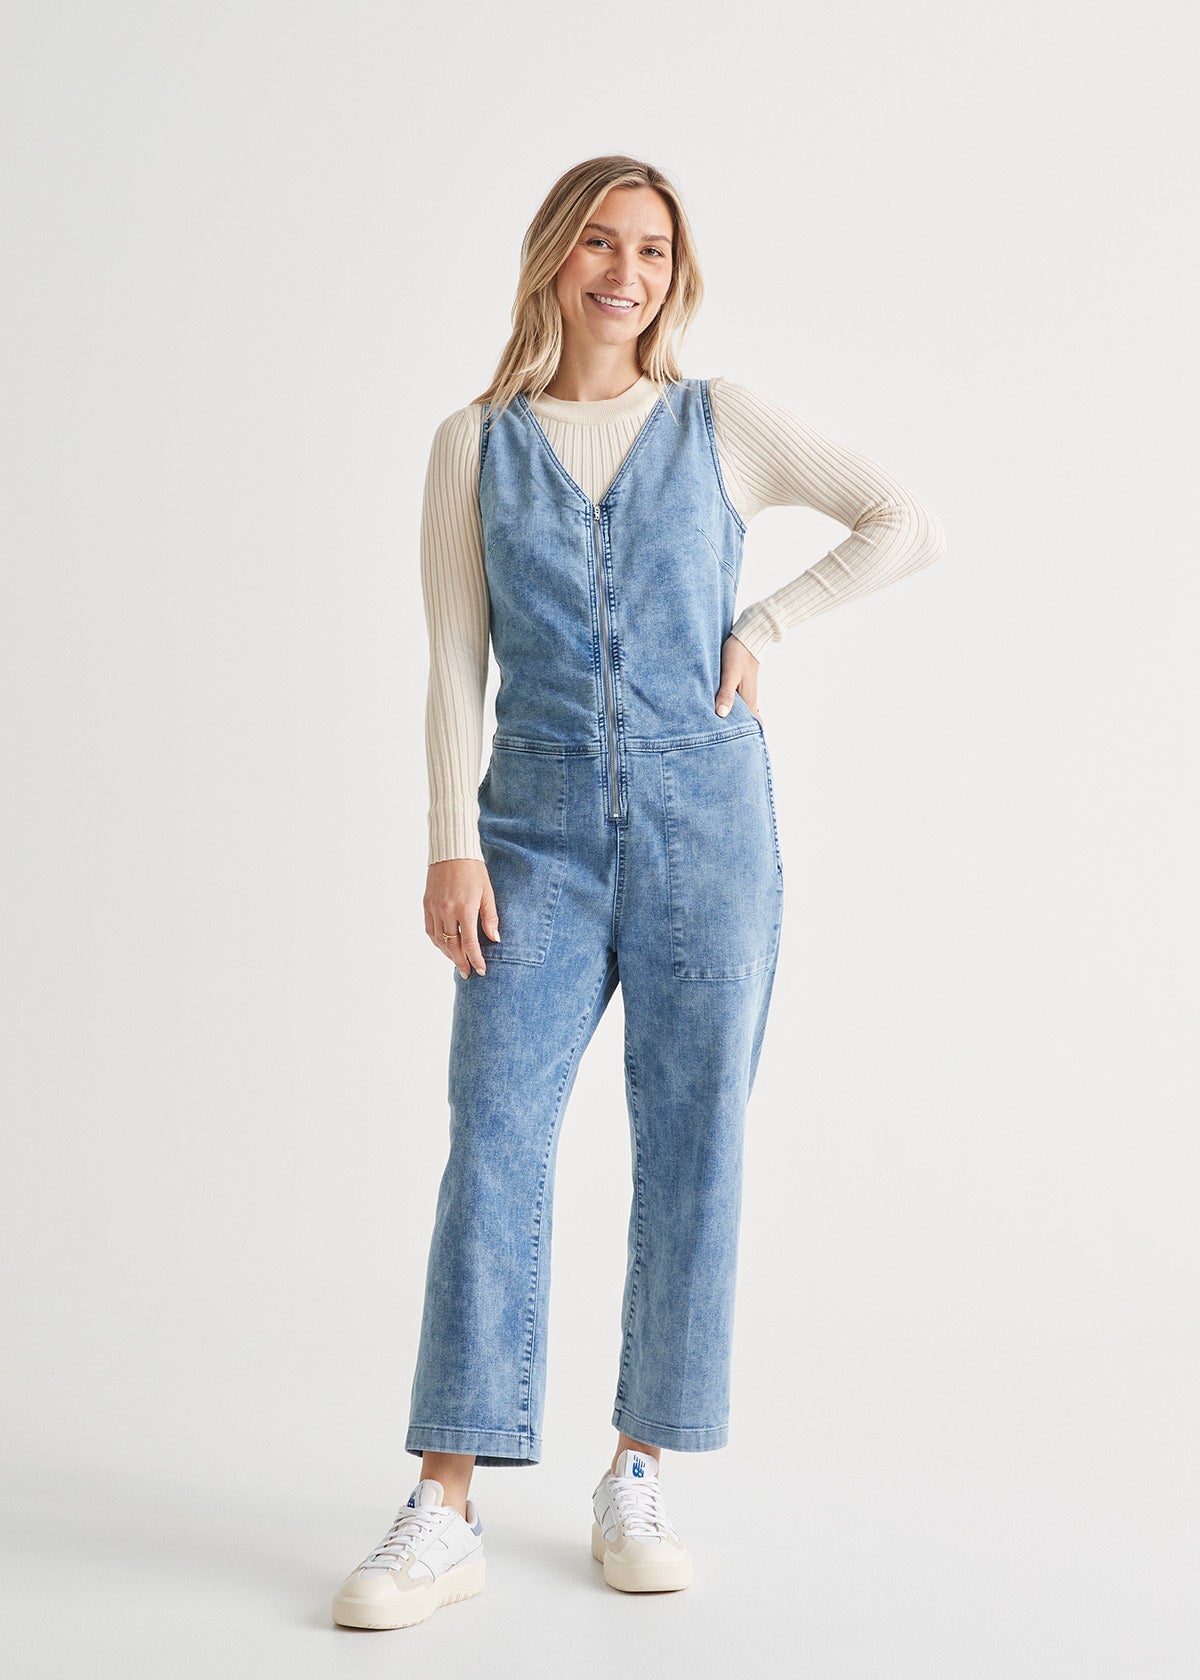 Jeans for Women Casual Denim Rompers Denim Overalls Ripped Washed